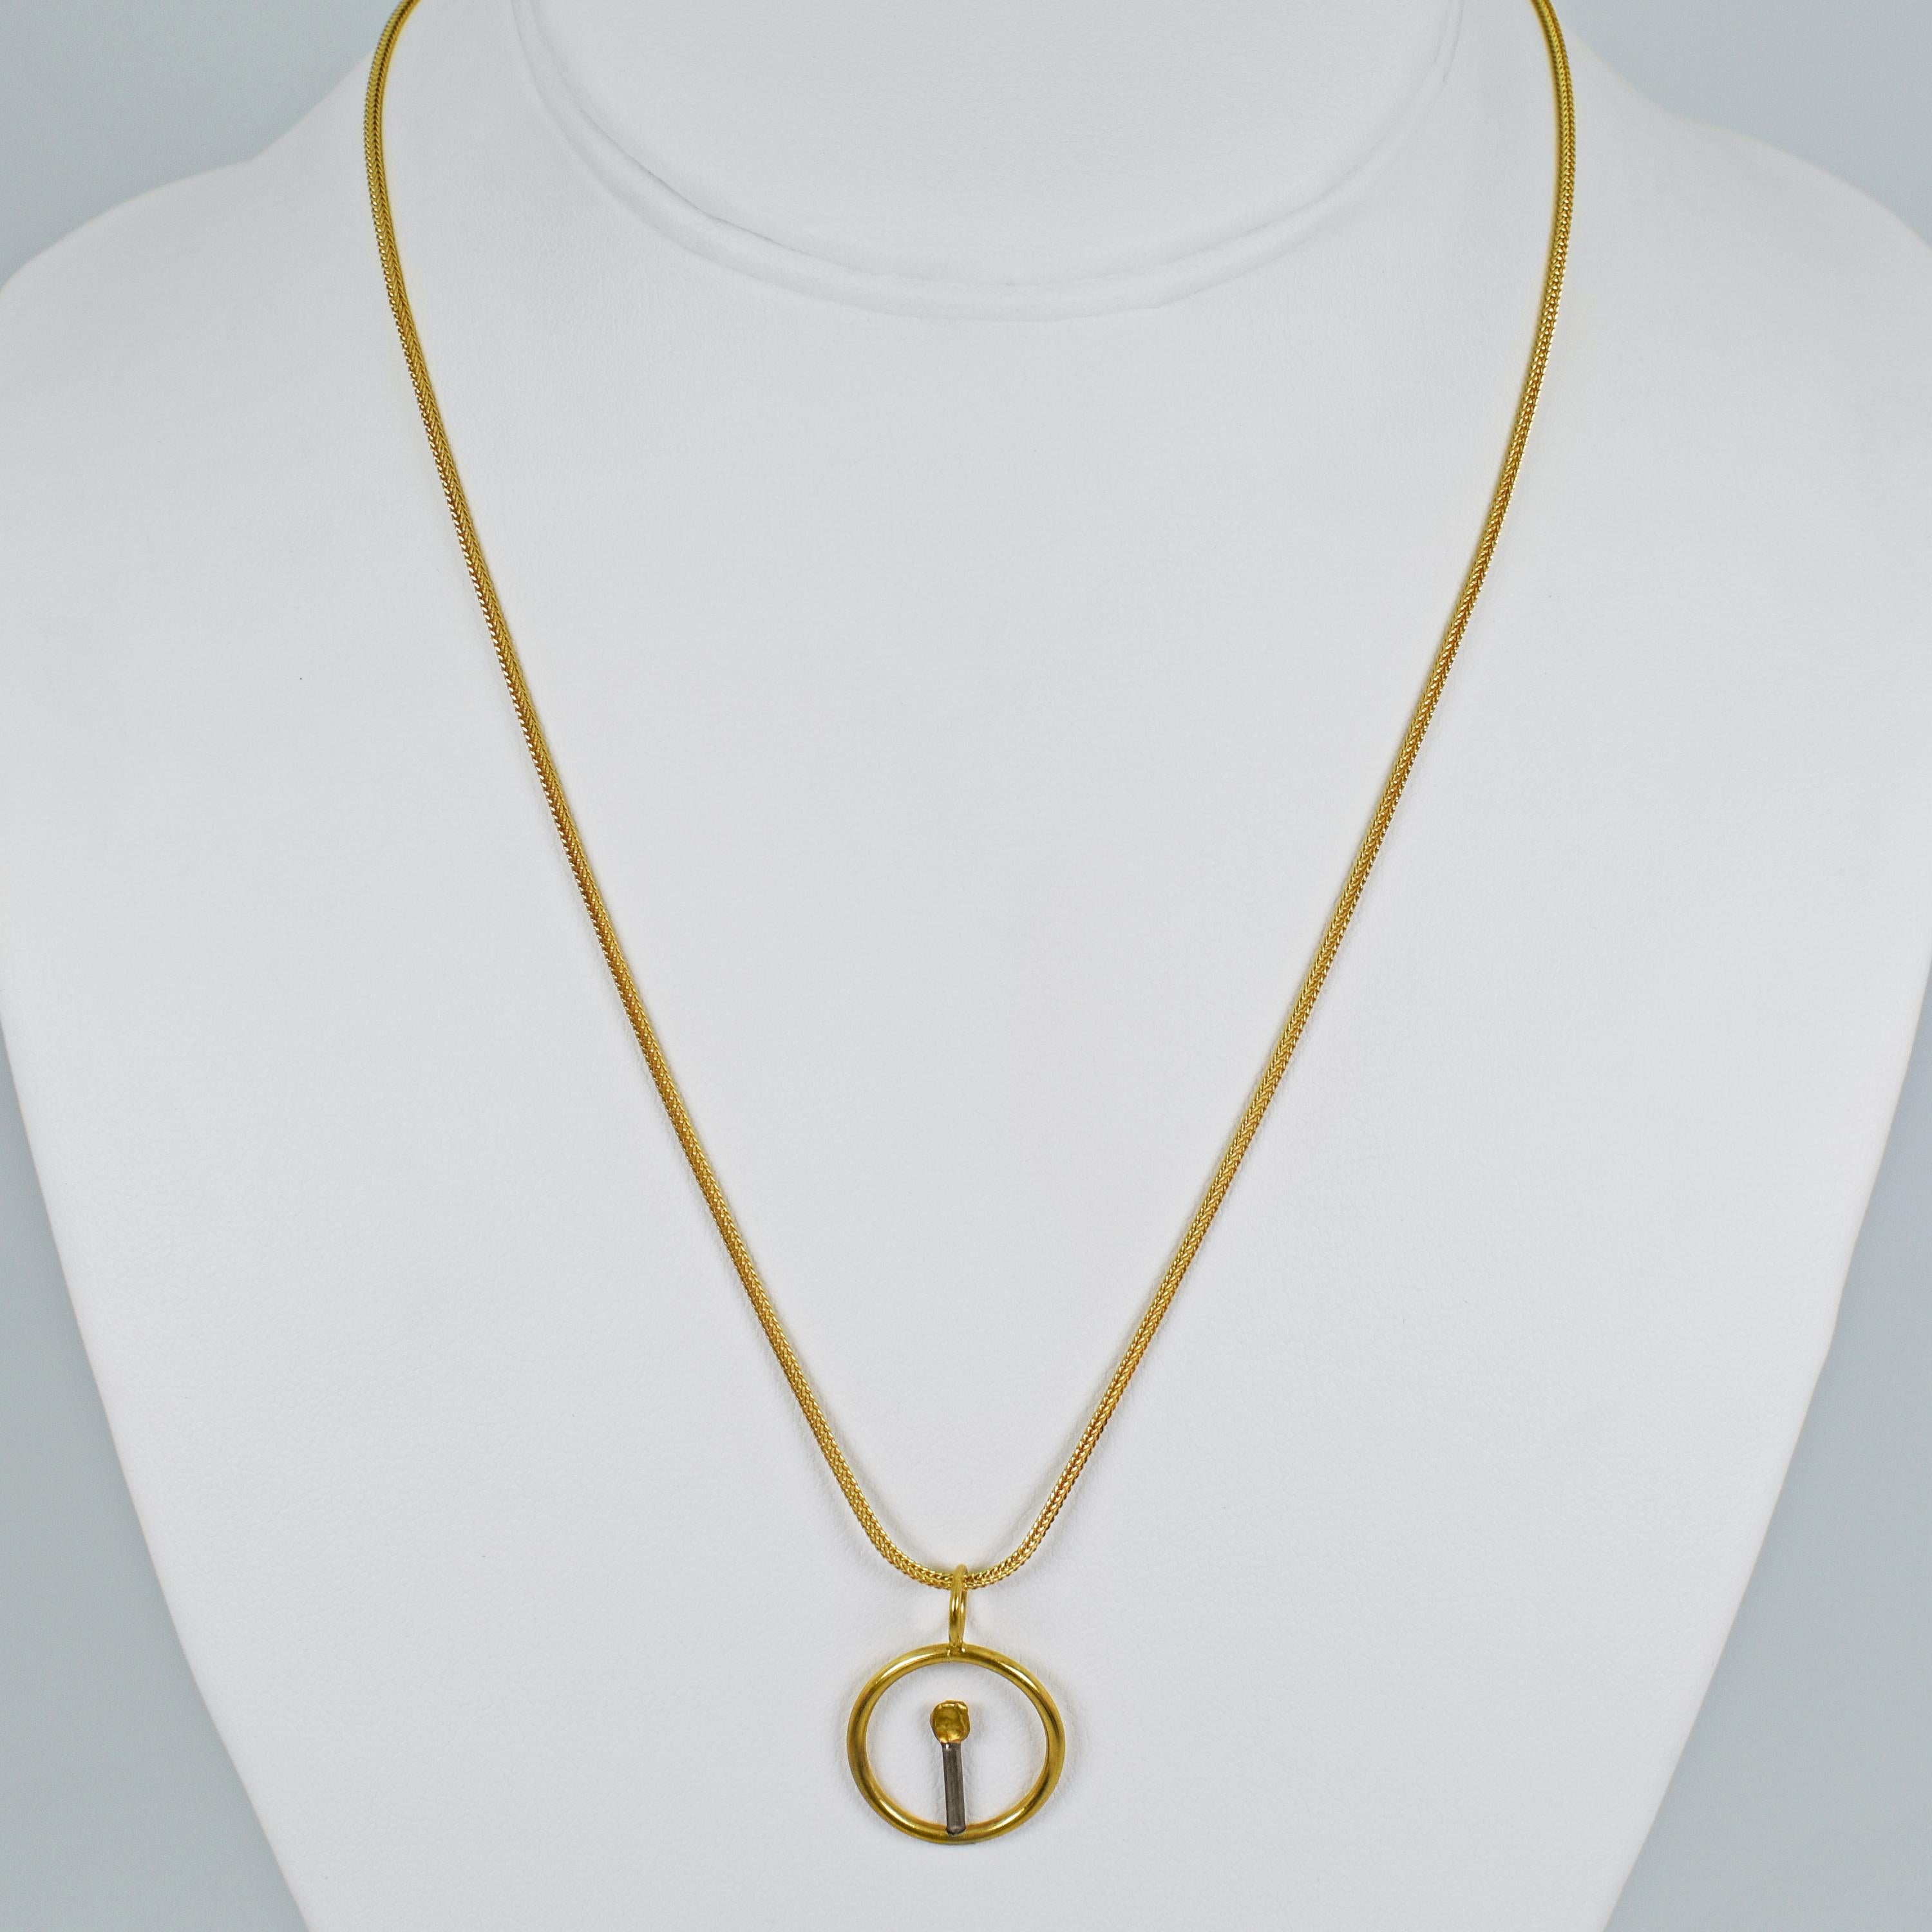 Contemporary Let Your Light Shine, Stories in a Circle 22k Gold Two-Tone Pendant Necklace For Sale